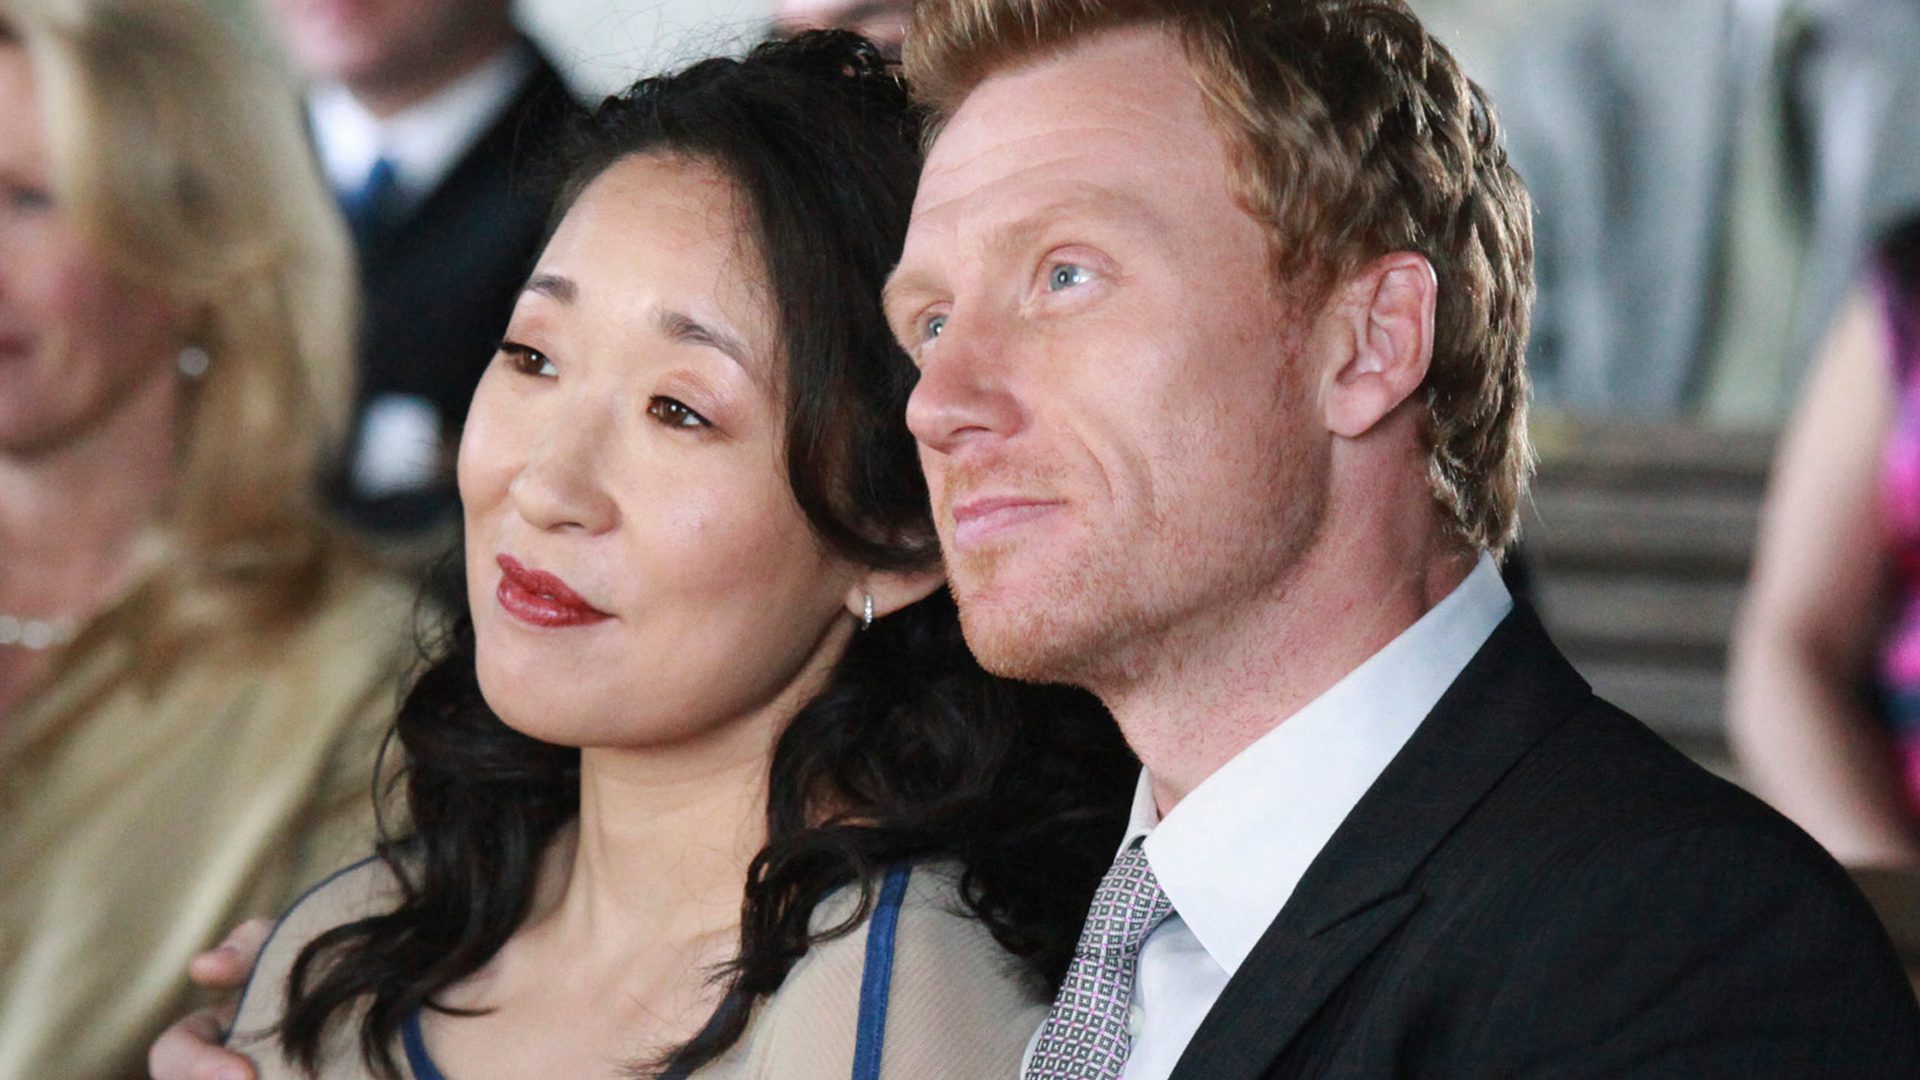 Who does Cristina end up with?